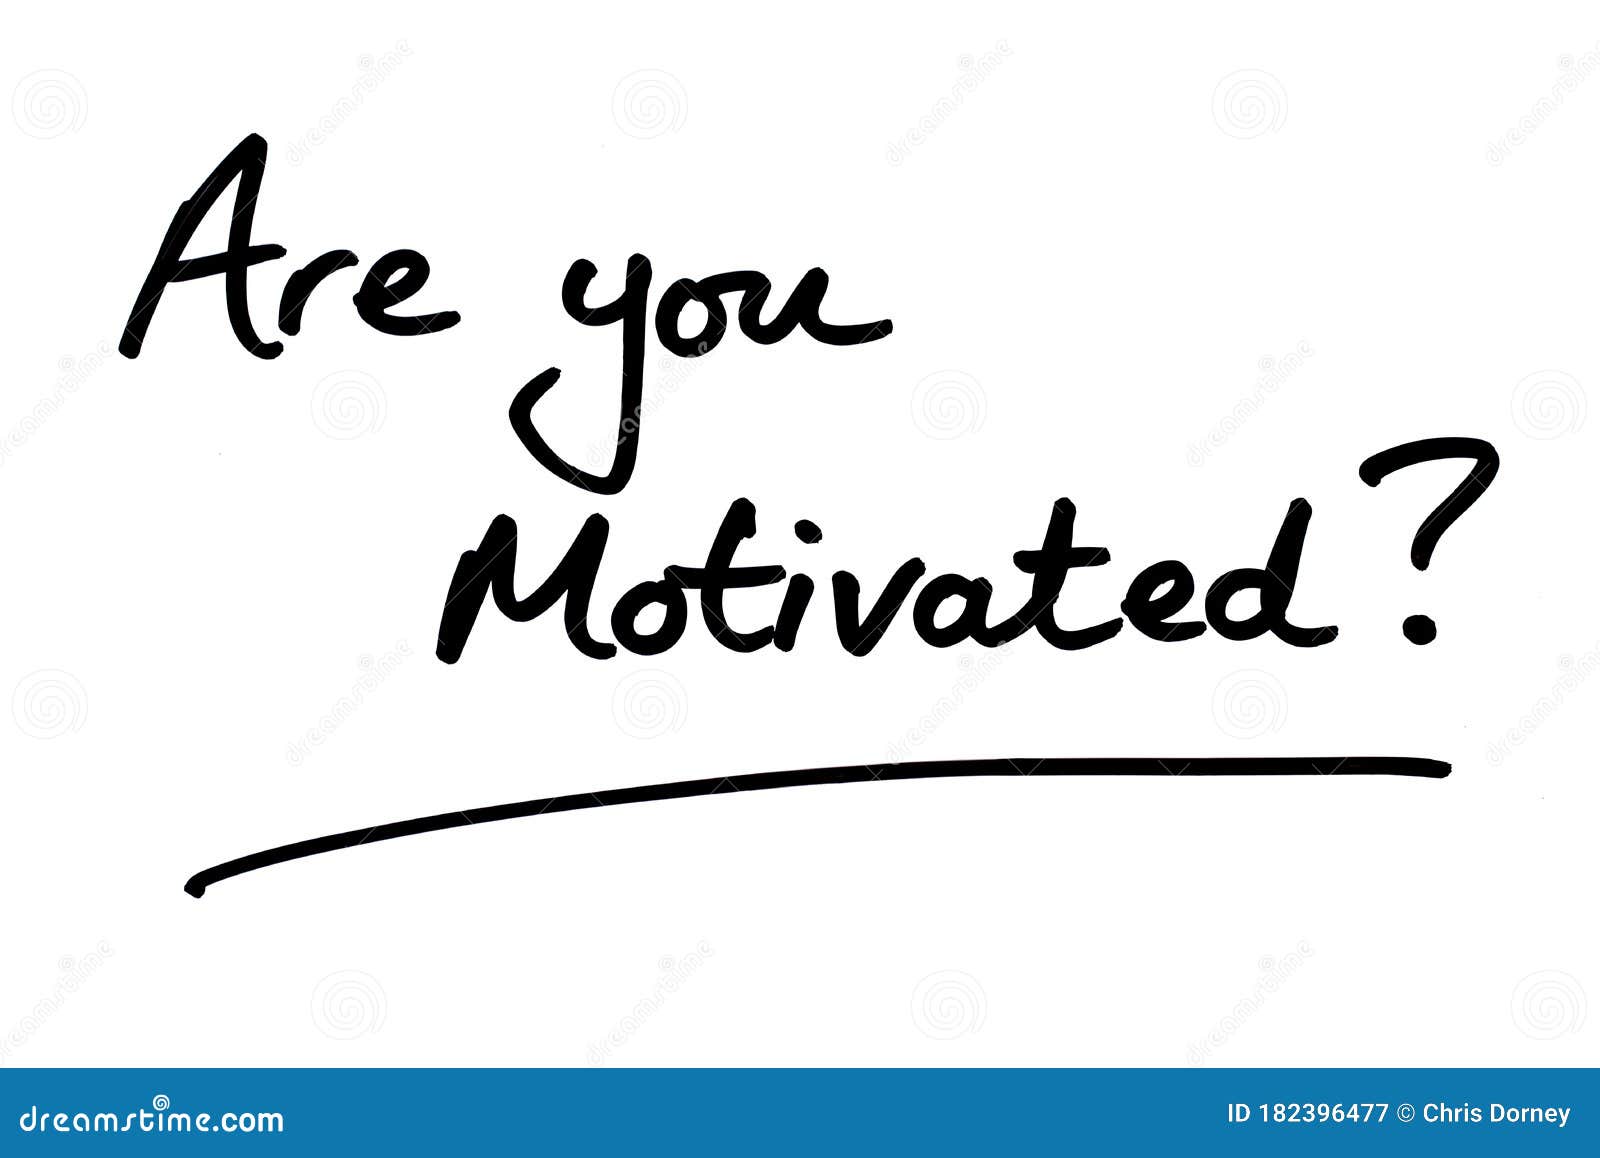 are you motivated